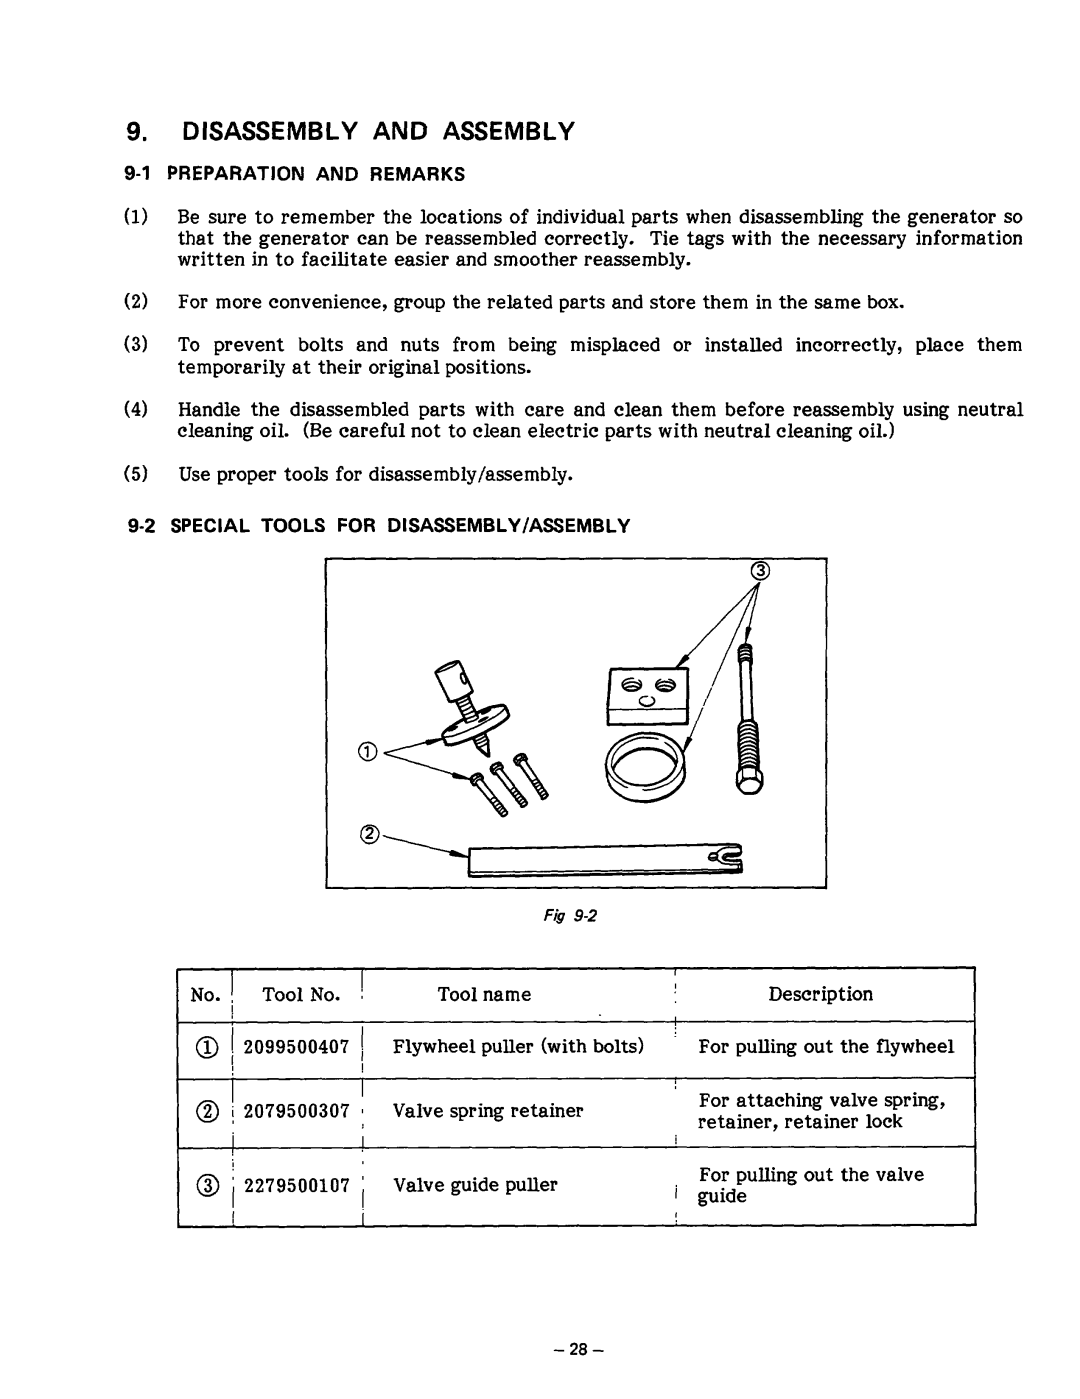 Subaru Robin Power Products R1200 service manual Disassembly And Assembly 